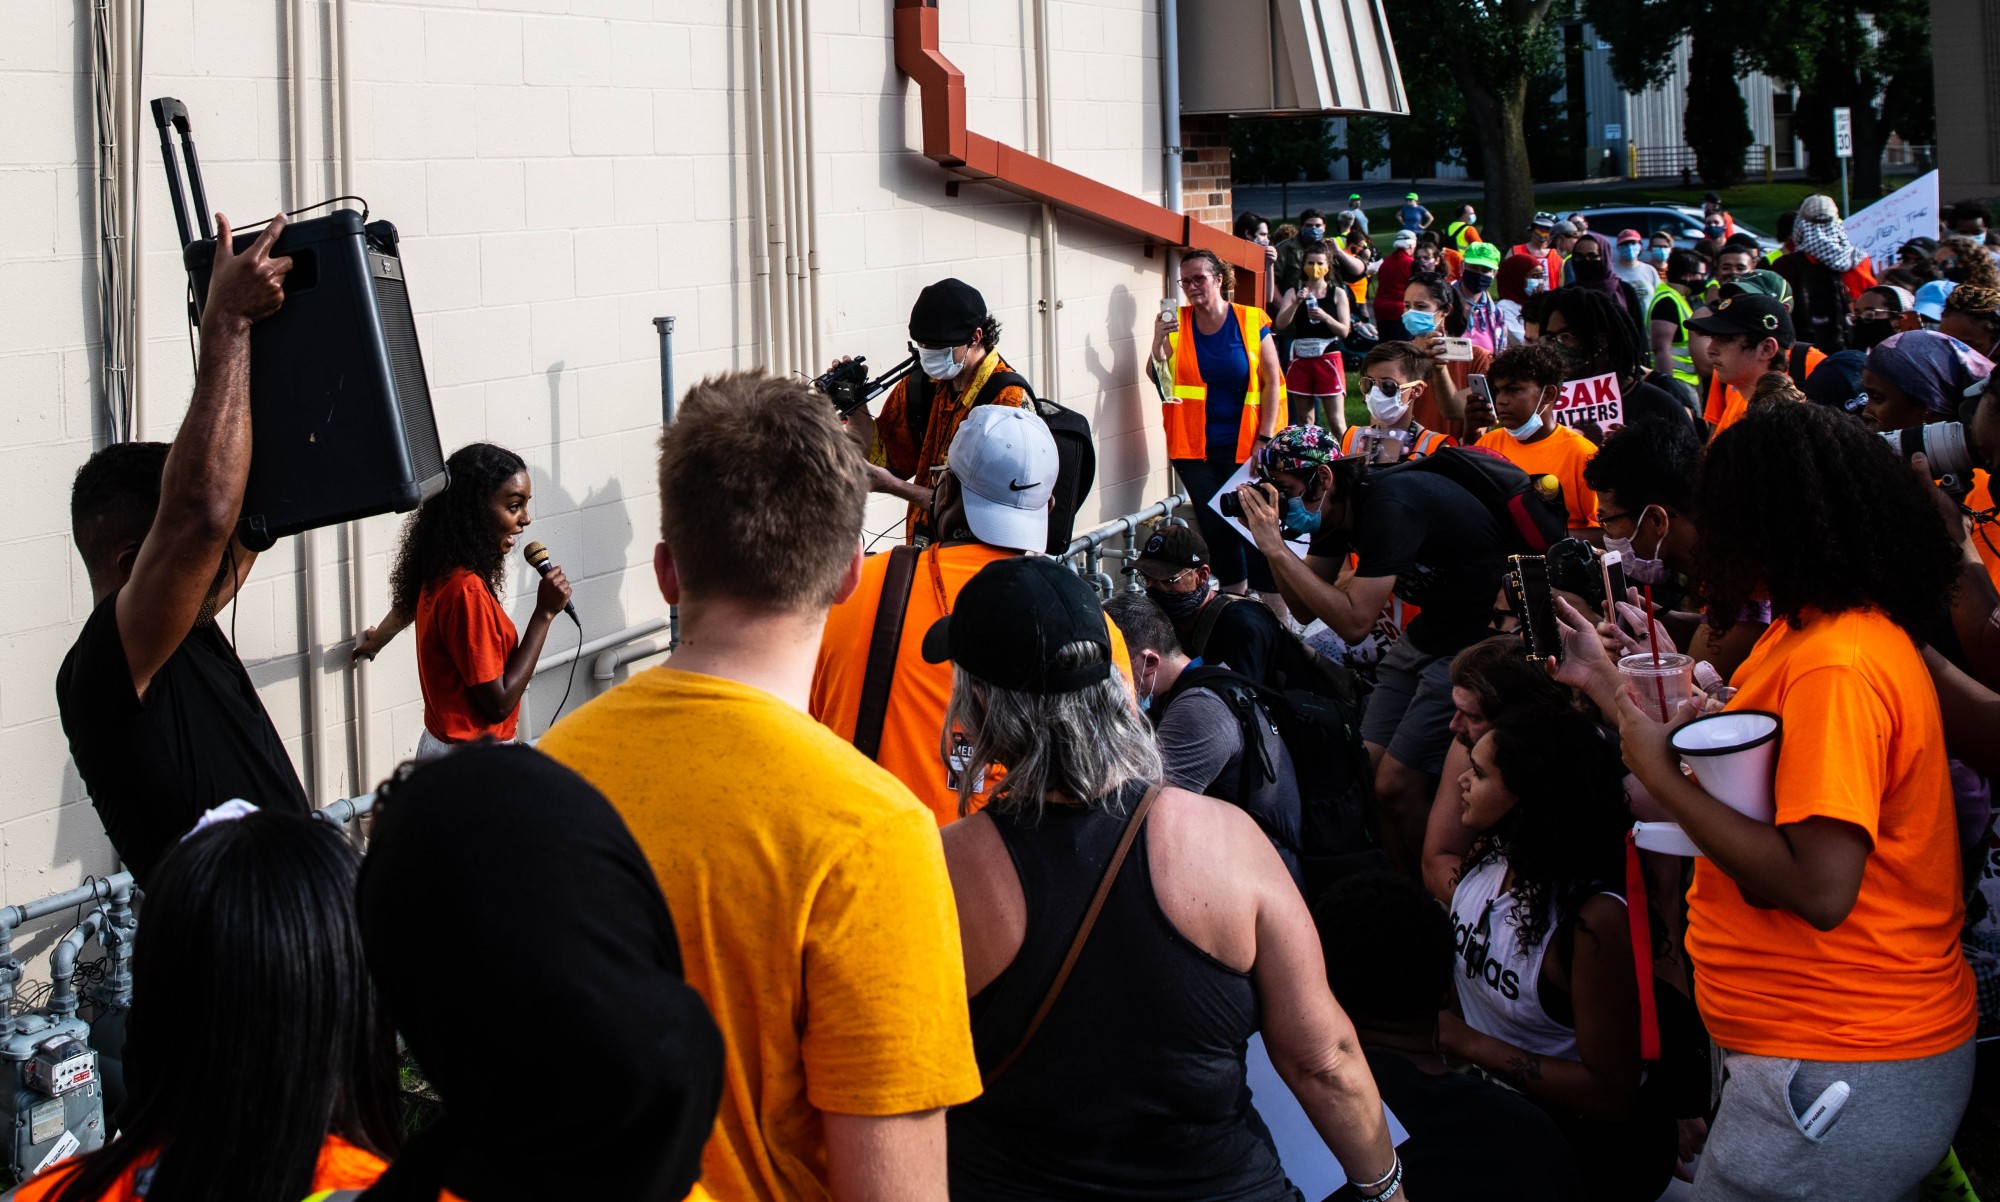 Sumaya Aden, Isak Aden’s sister, addresses protesters in a parking lot near Twin Cities Premium Outlets, the site where police killed 23-year-old Isak Aden in July of 2019 in Eagan on Wednesday, July 1.  